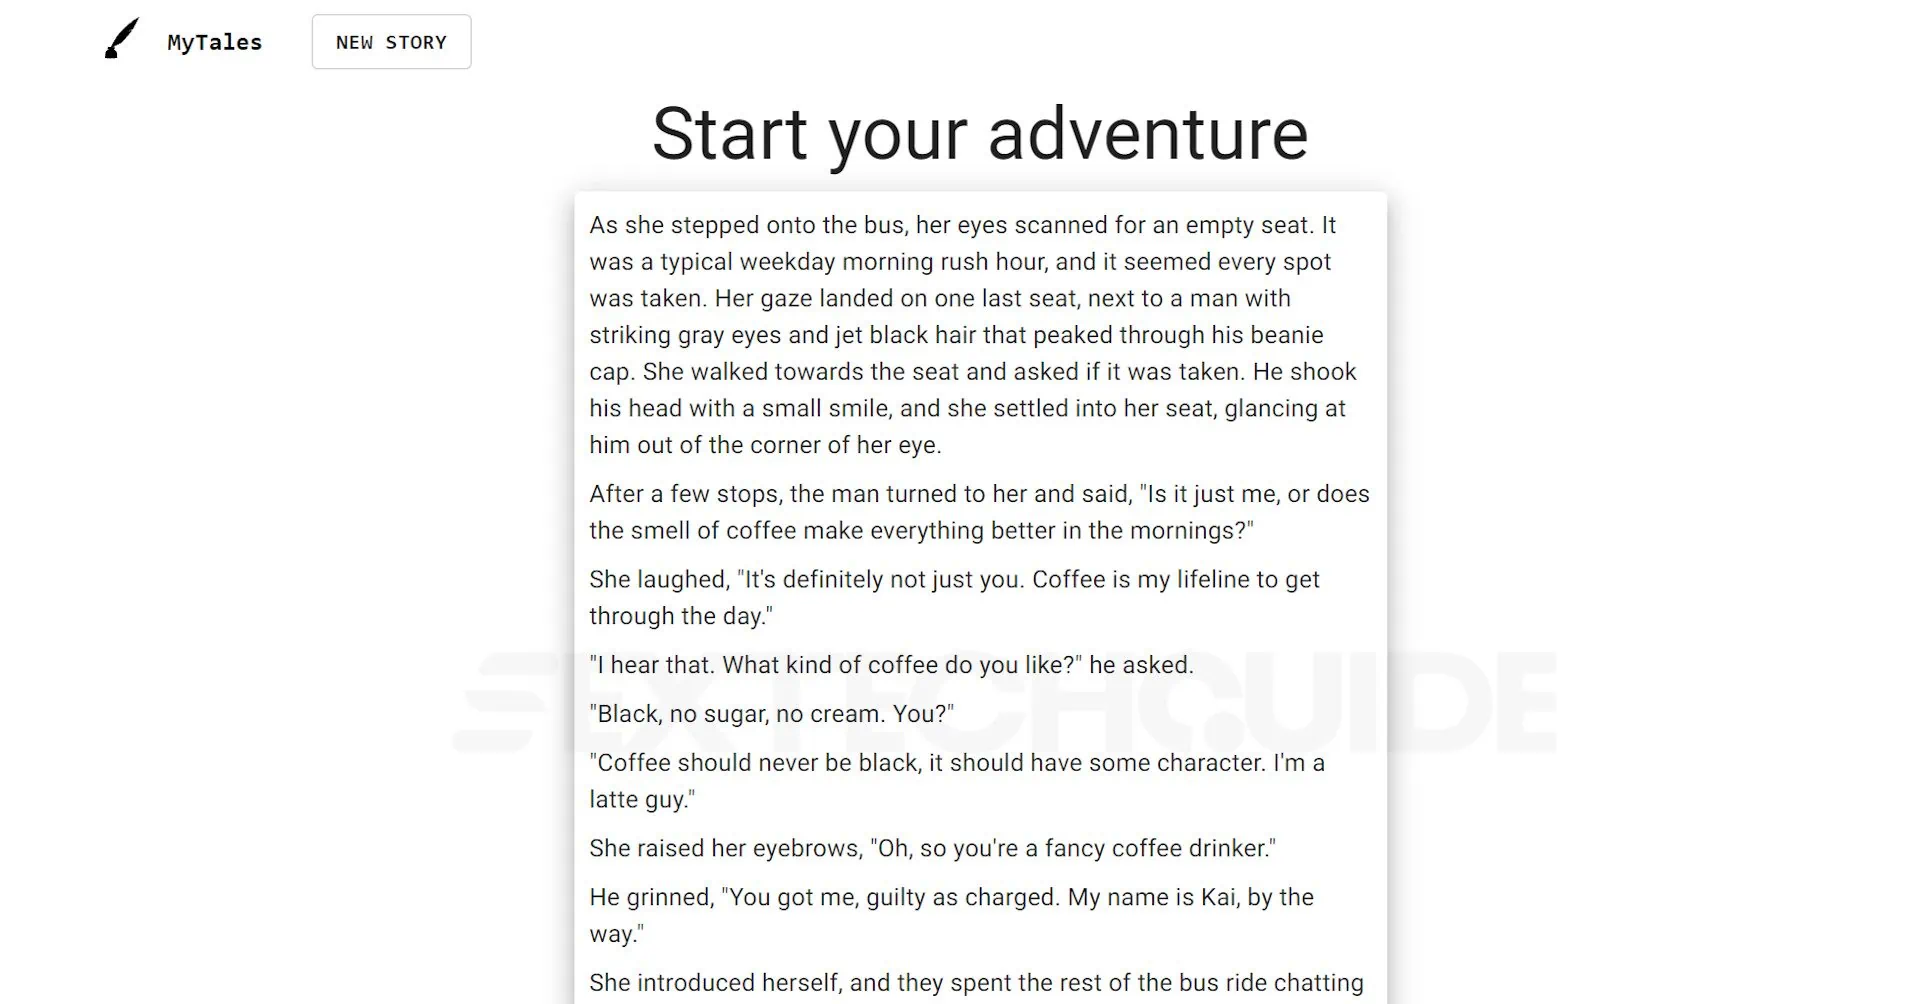 A screen shot of a website with the words "start your adventure" prominently displayed.